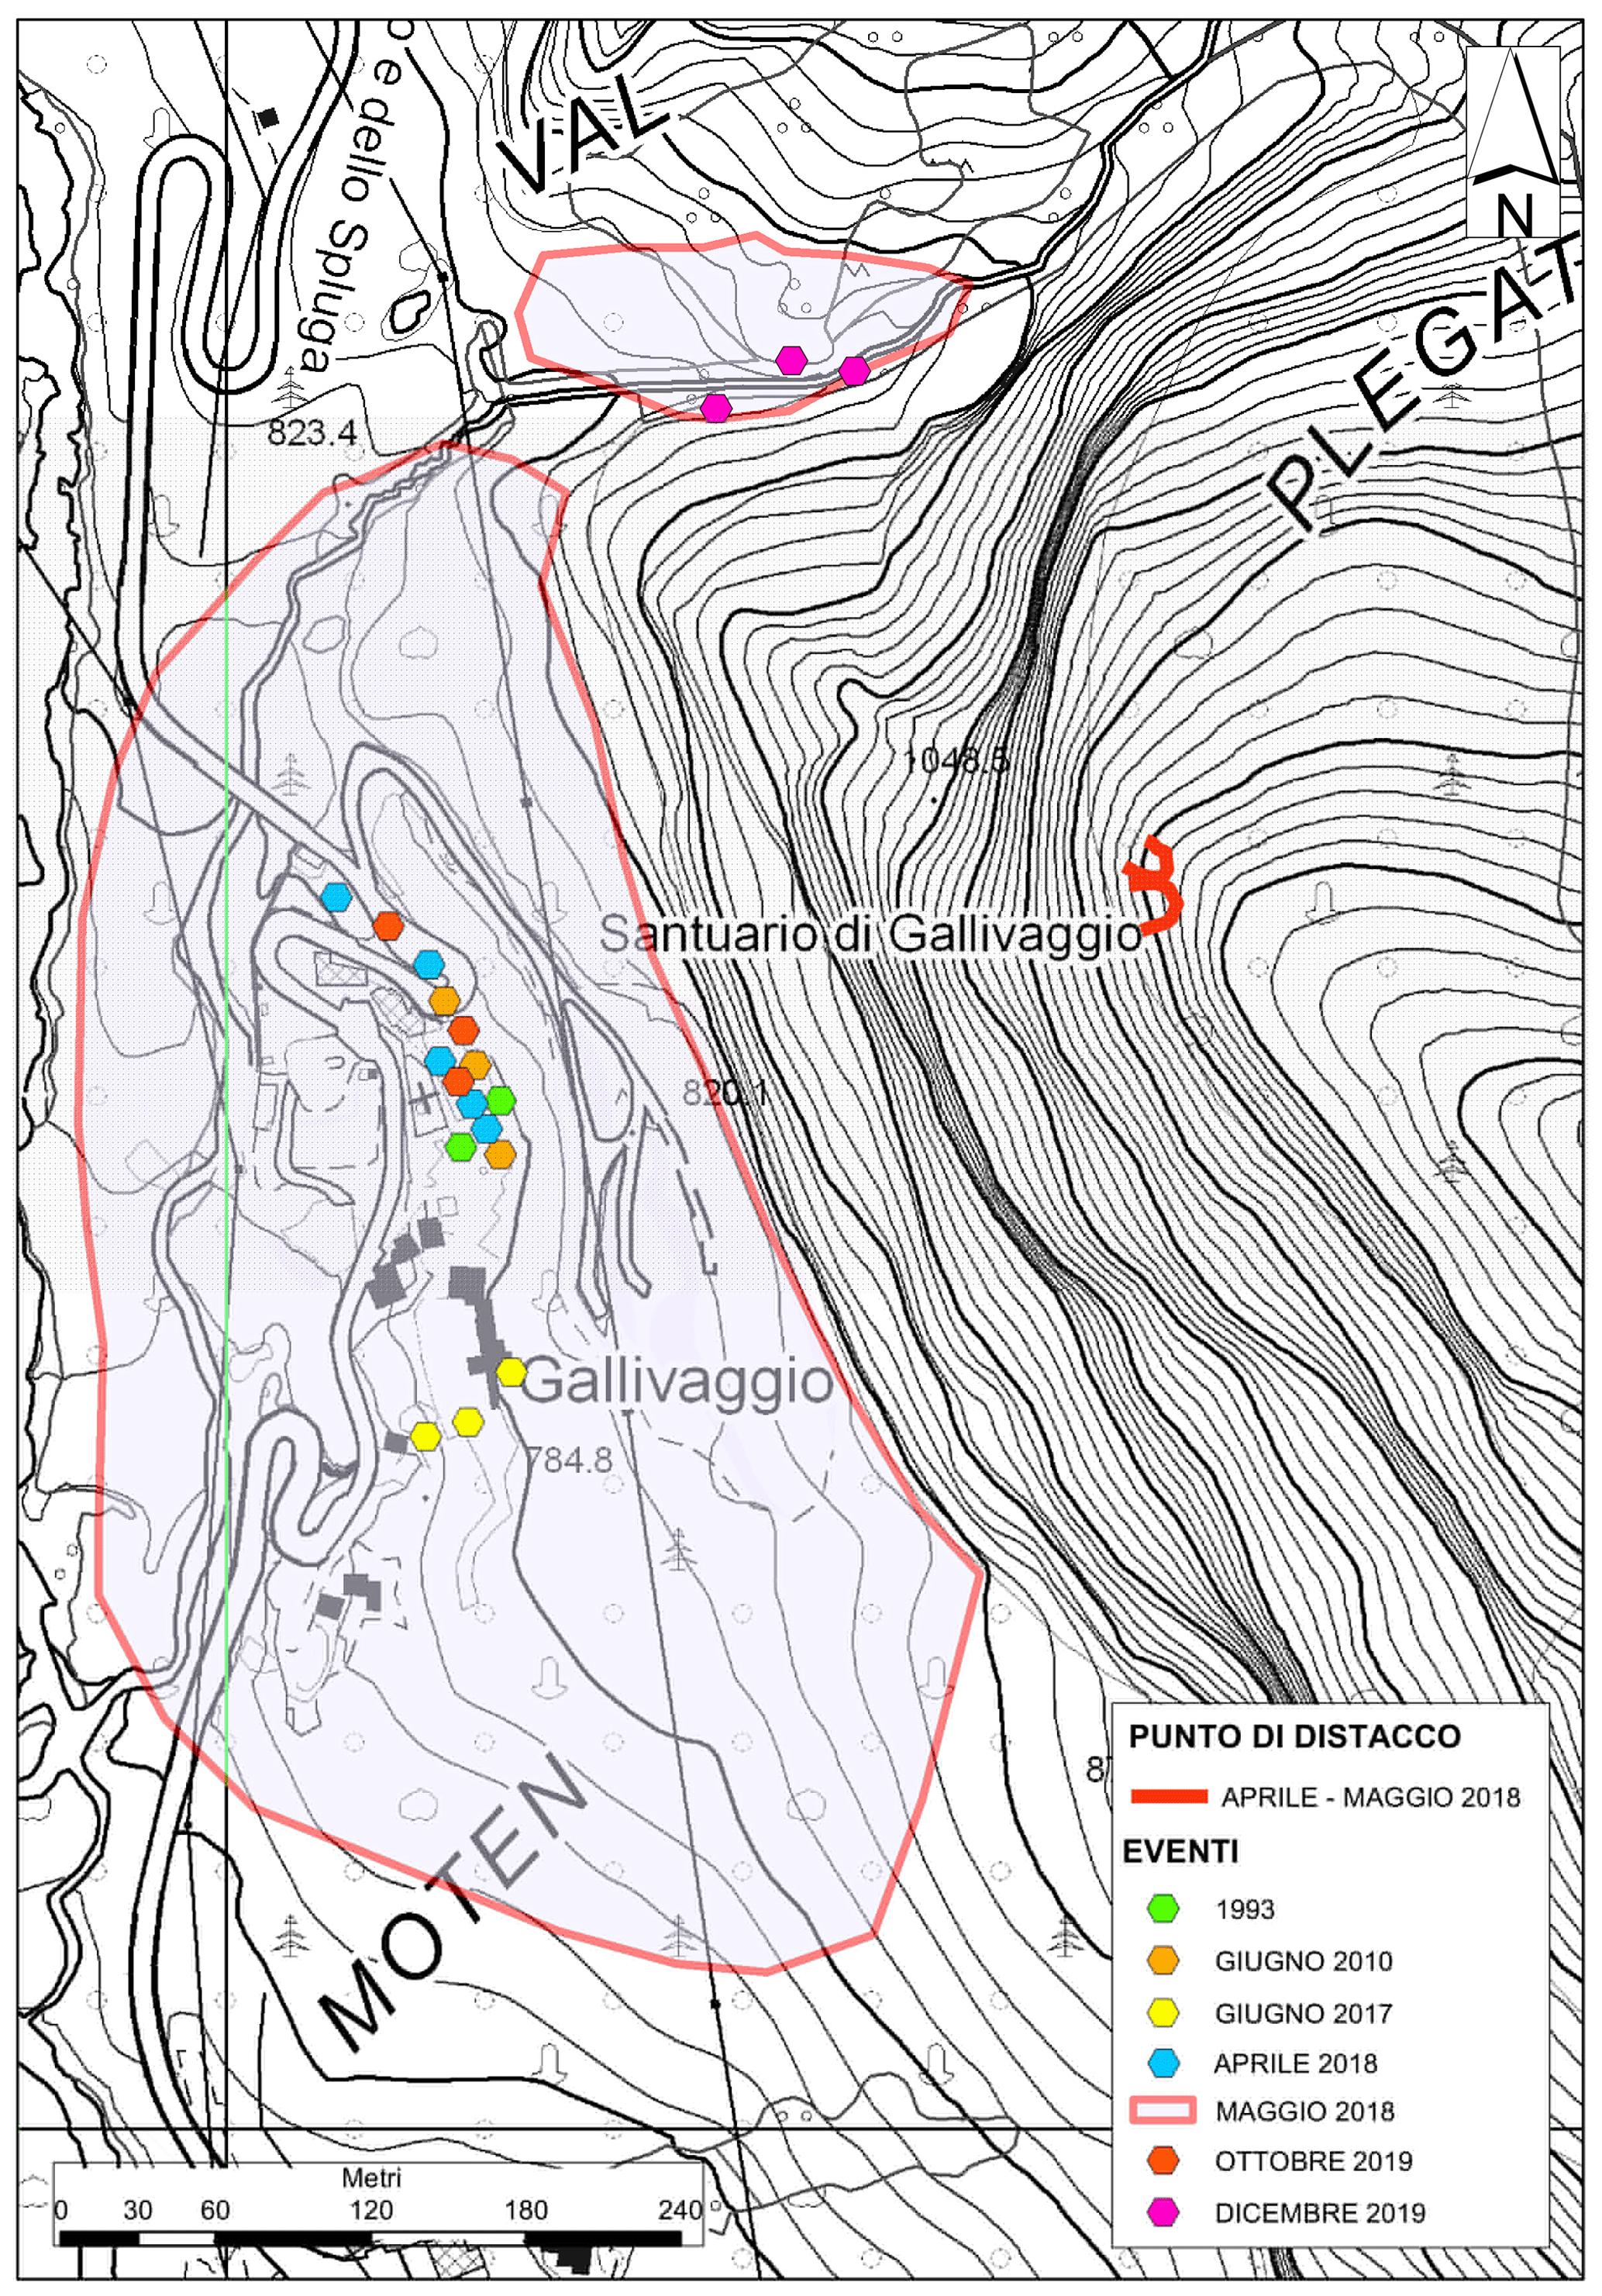 Gh Geological Monitoring Networks For Risk Management Close To Large Rock Cliffs The Case History Of Gallivaggio And Cataeggio In The Italian Alps